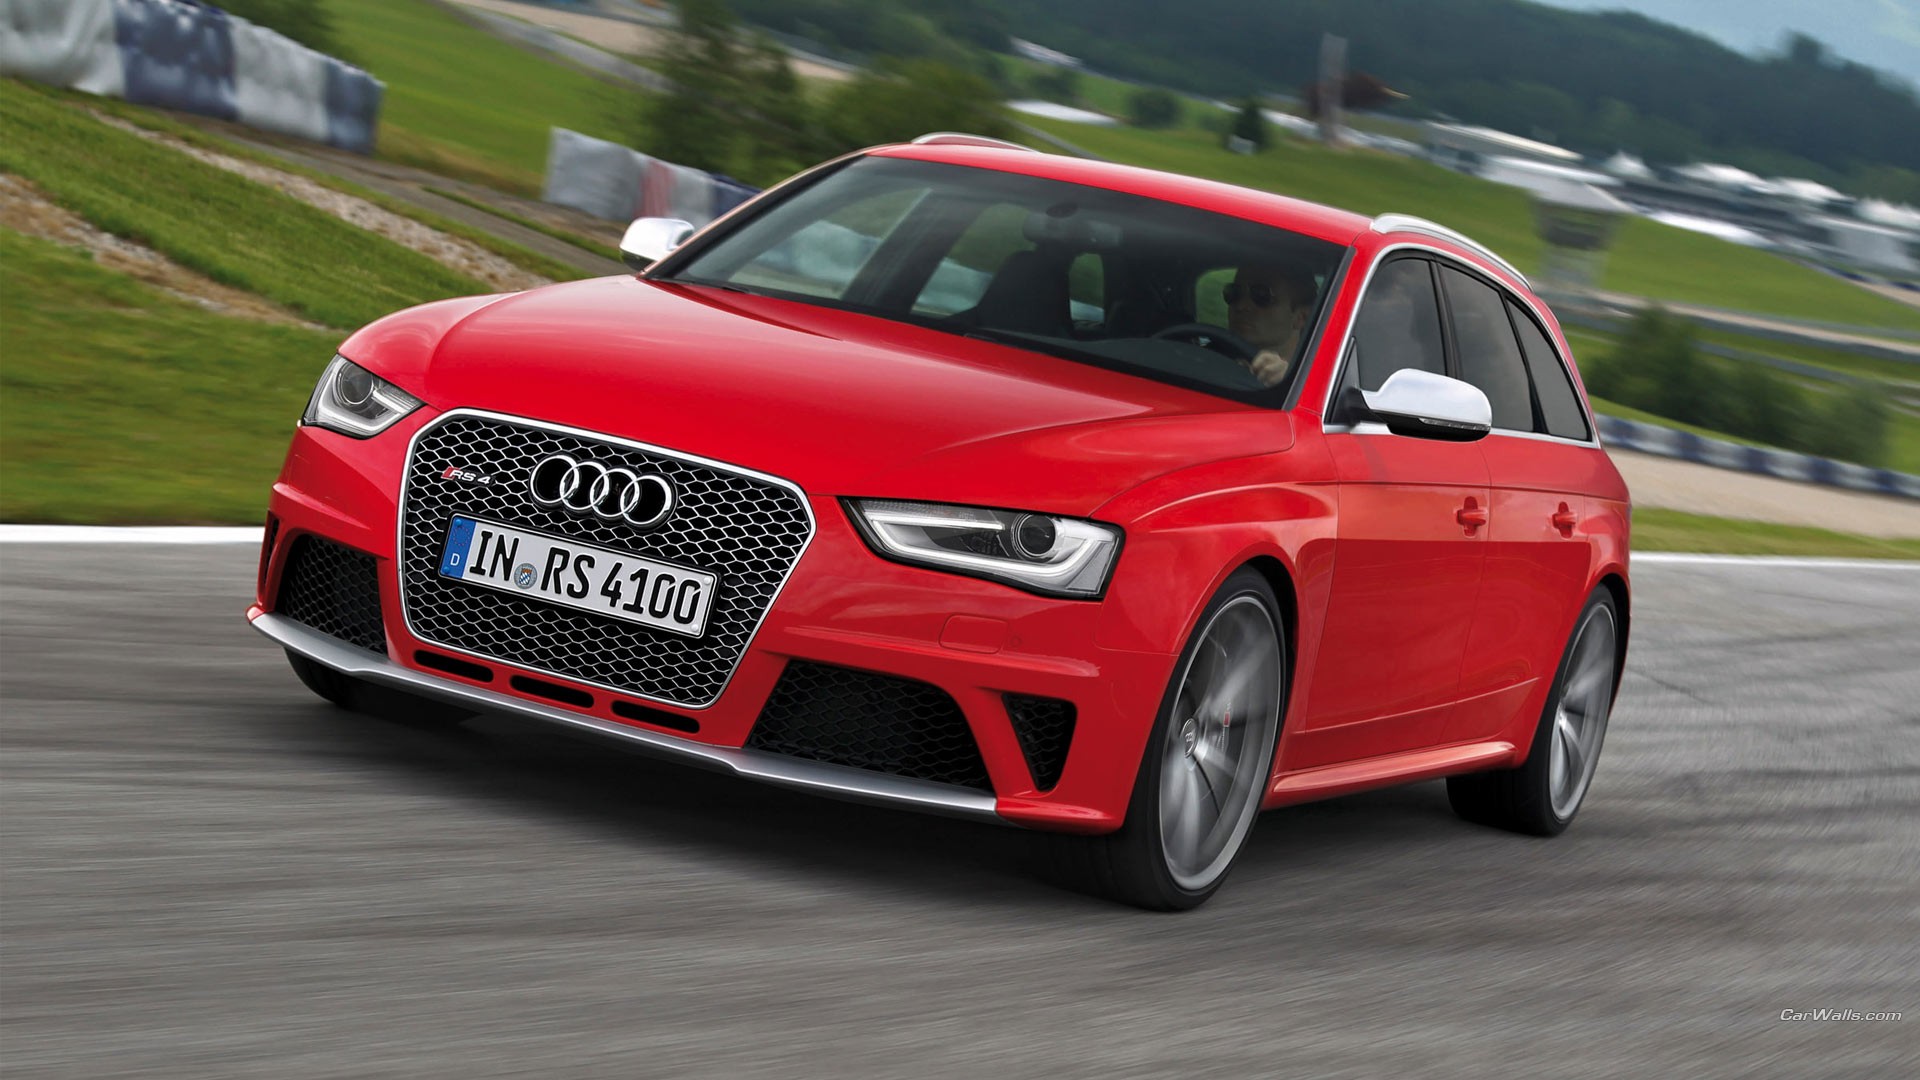 General 1920x1080 Audi RS4 Audi red cars vehicle car German cars station wagon Volkswagen Group